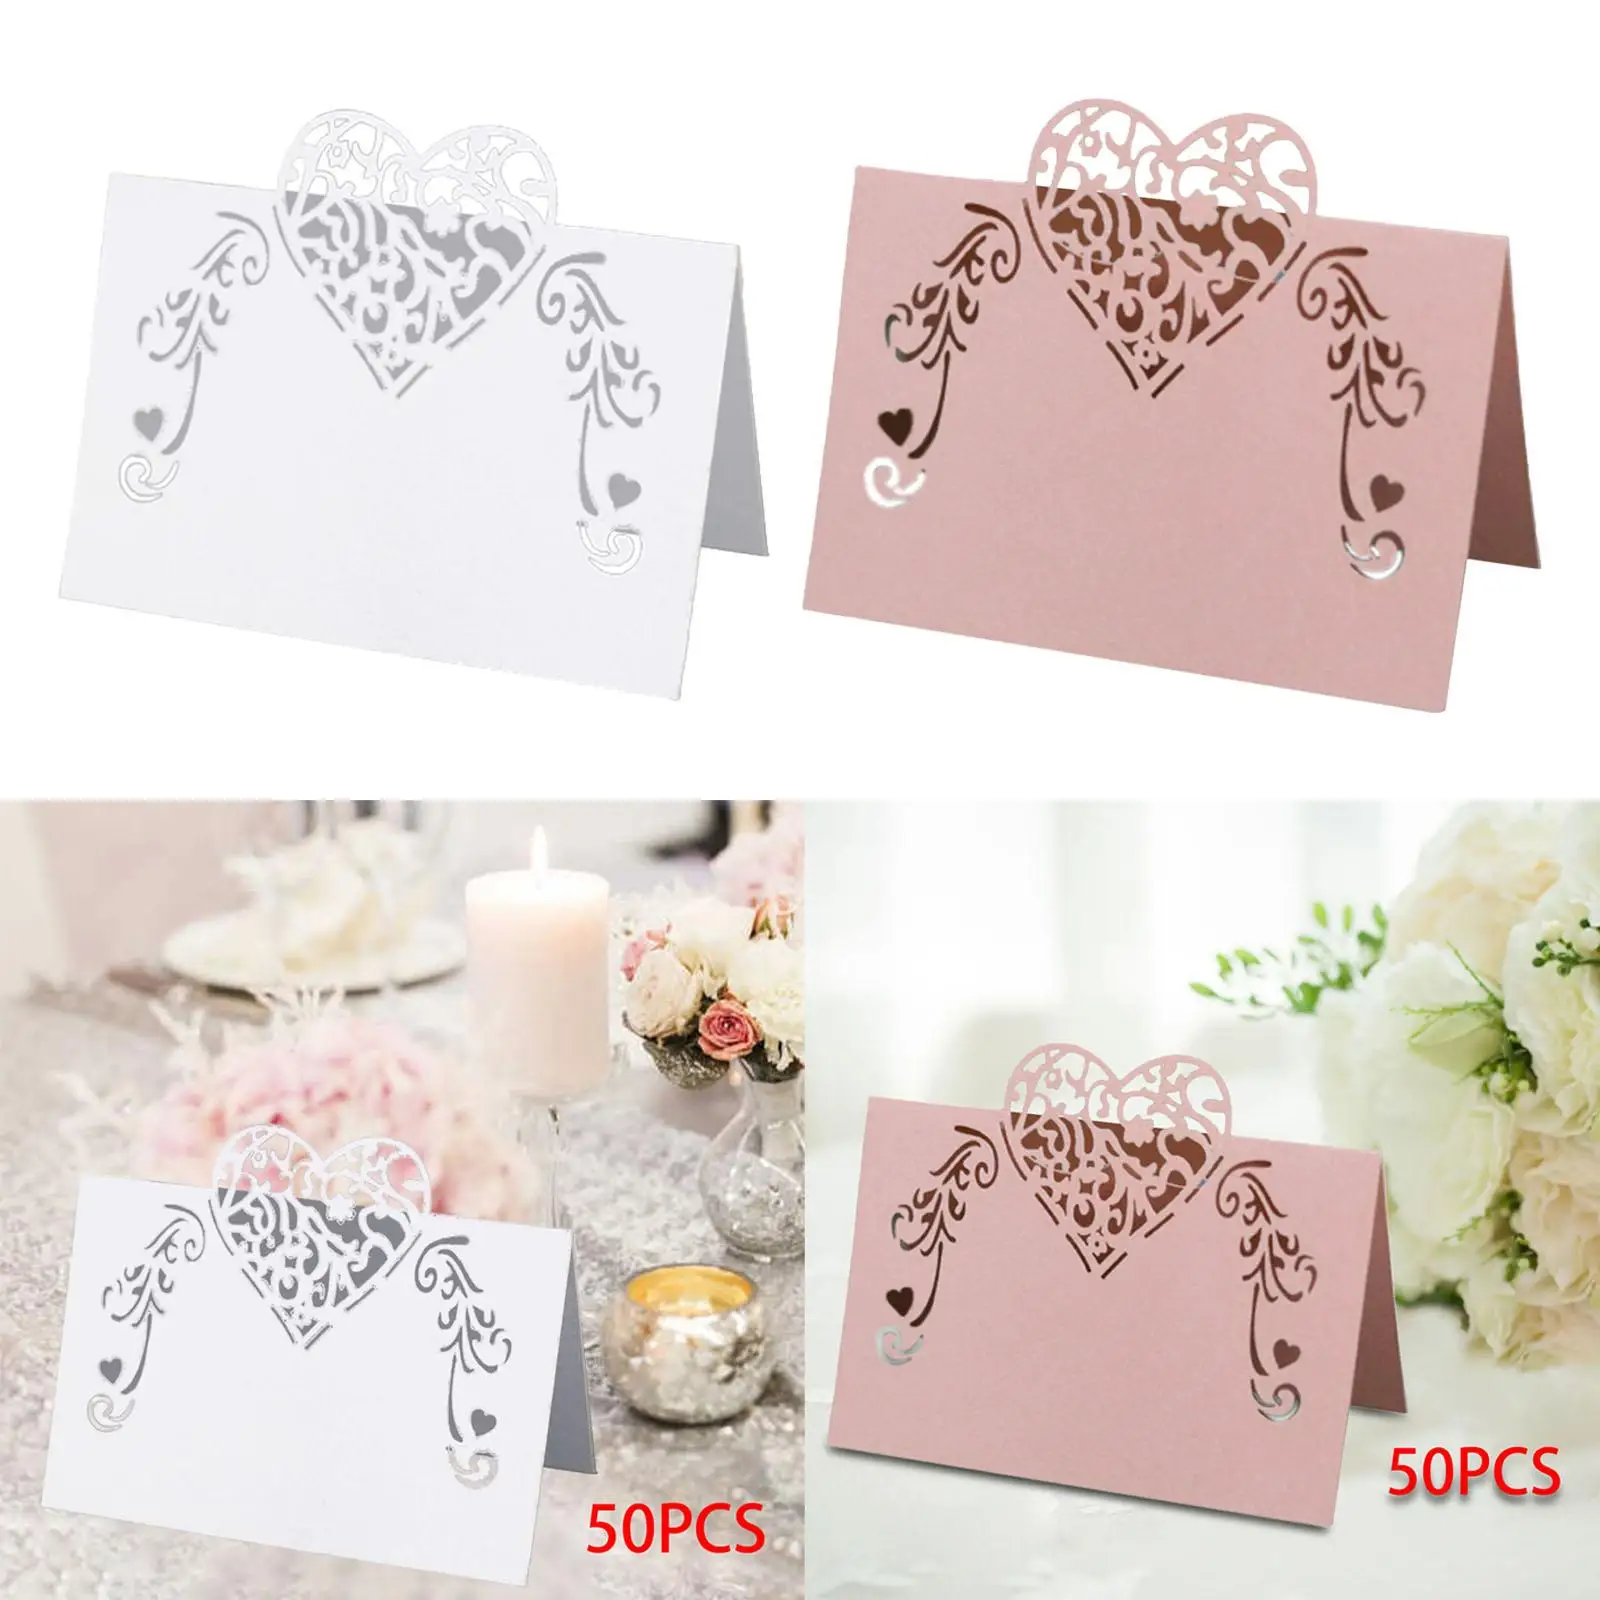 50 Pieces Paper Place Cards Seating Place Card for Baby Shower Birthday